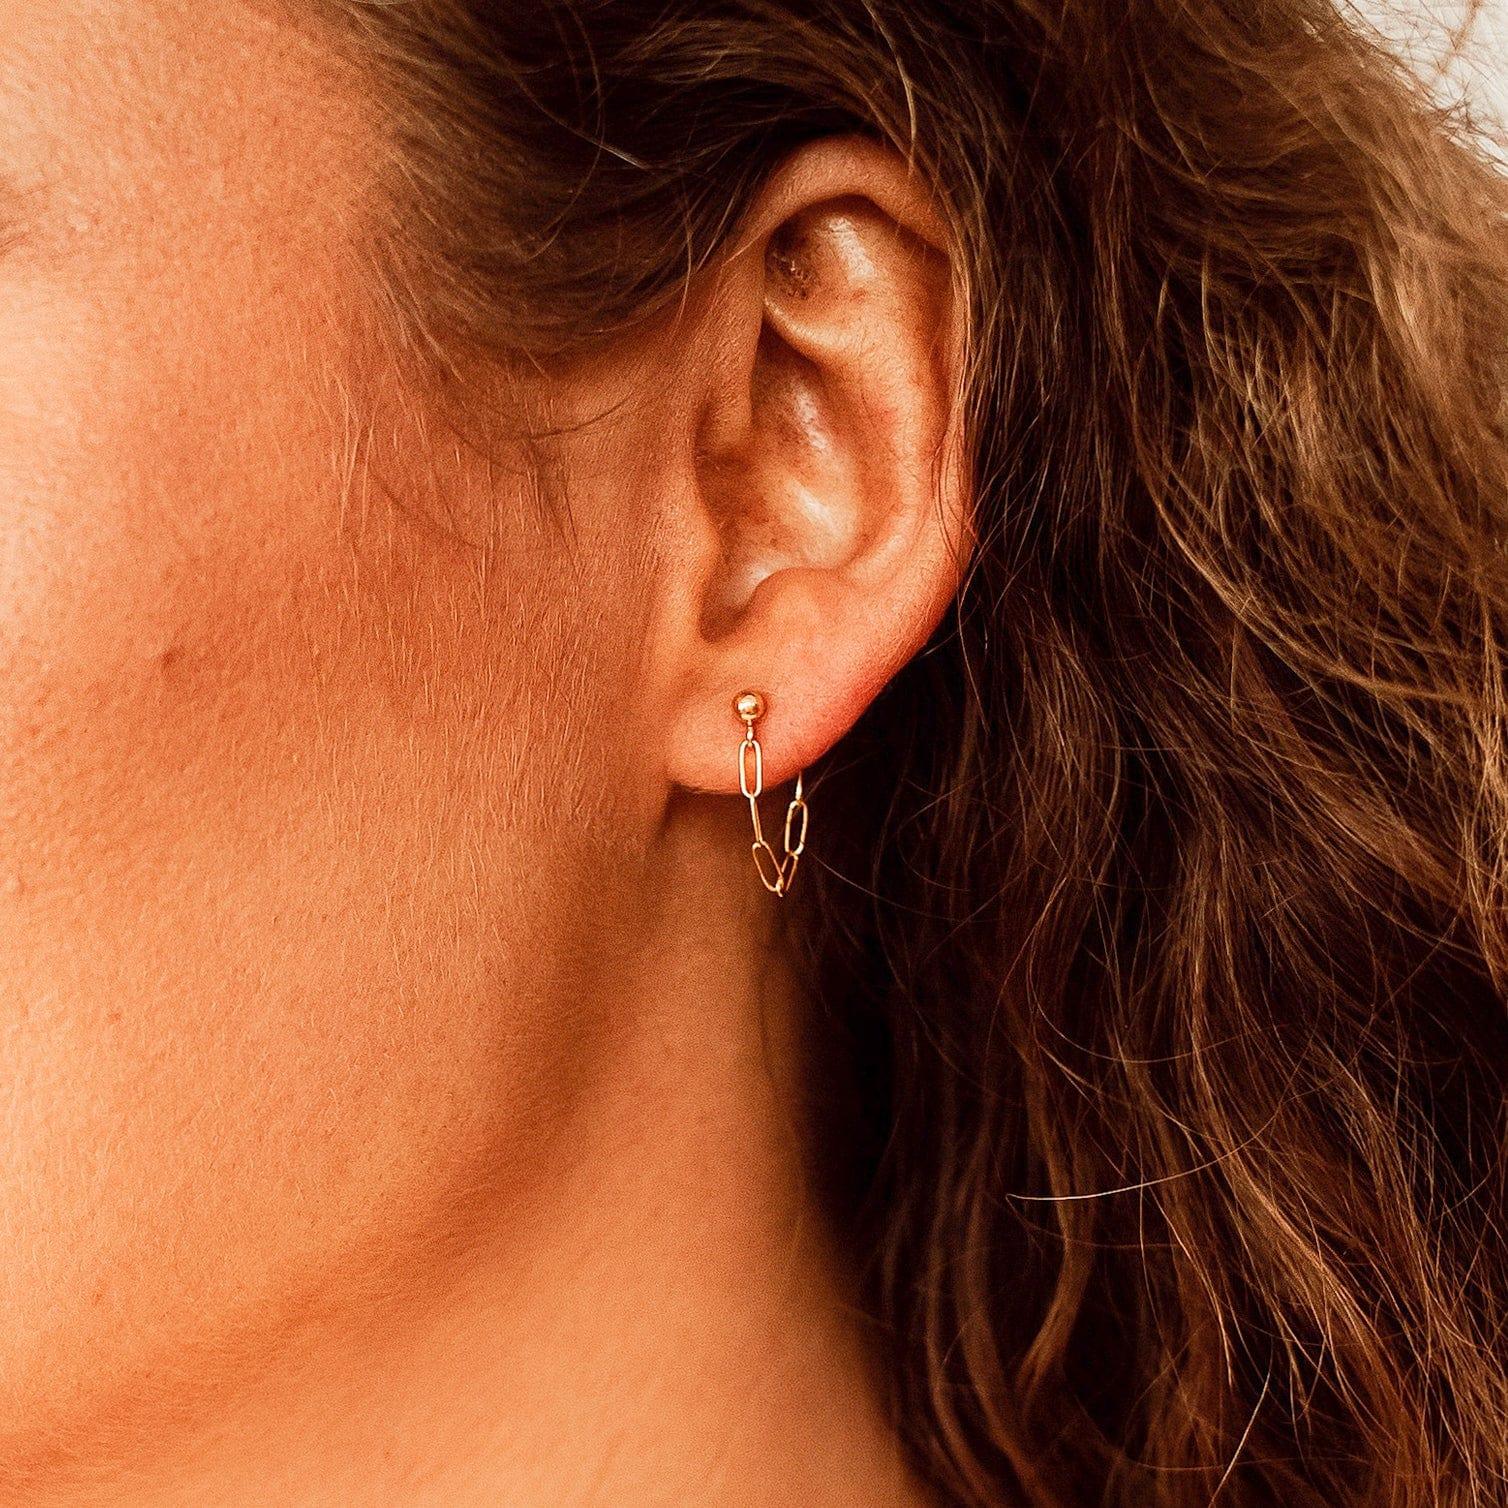 Modern Chain Loop Earrings - Nolia Jewelry - Meaningful + Sustainably Handcrafted Jewelry